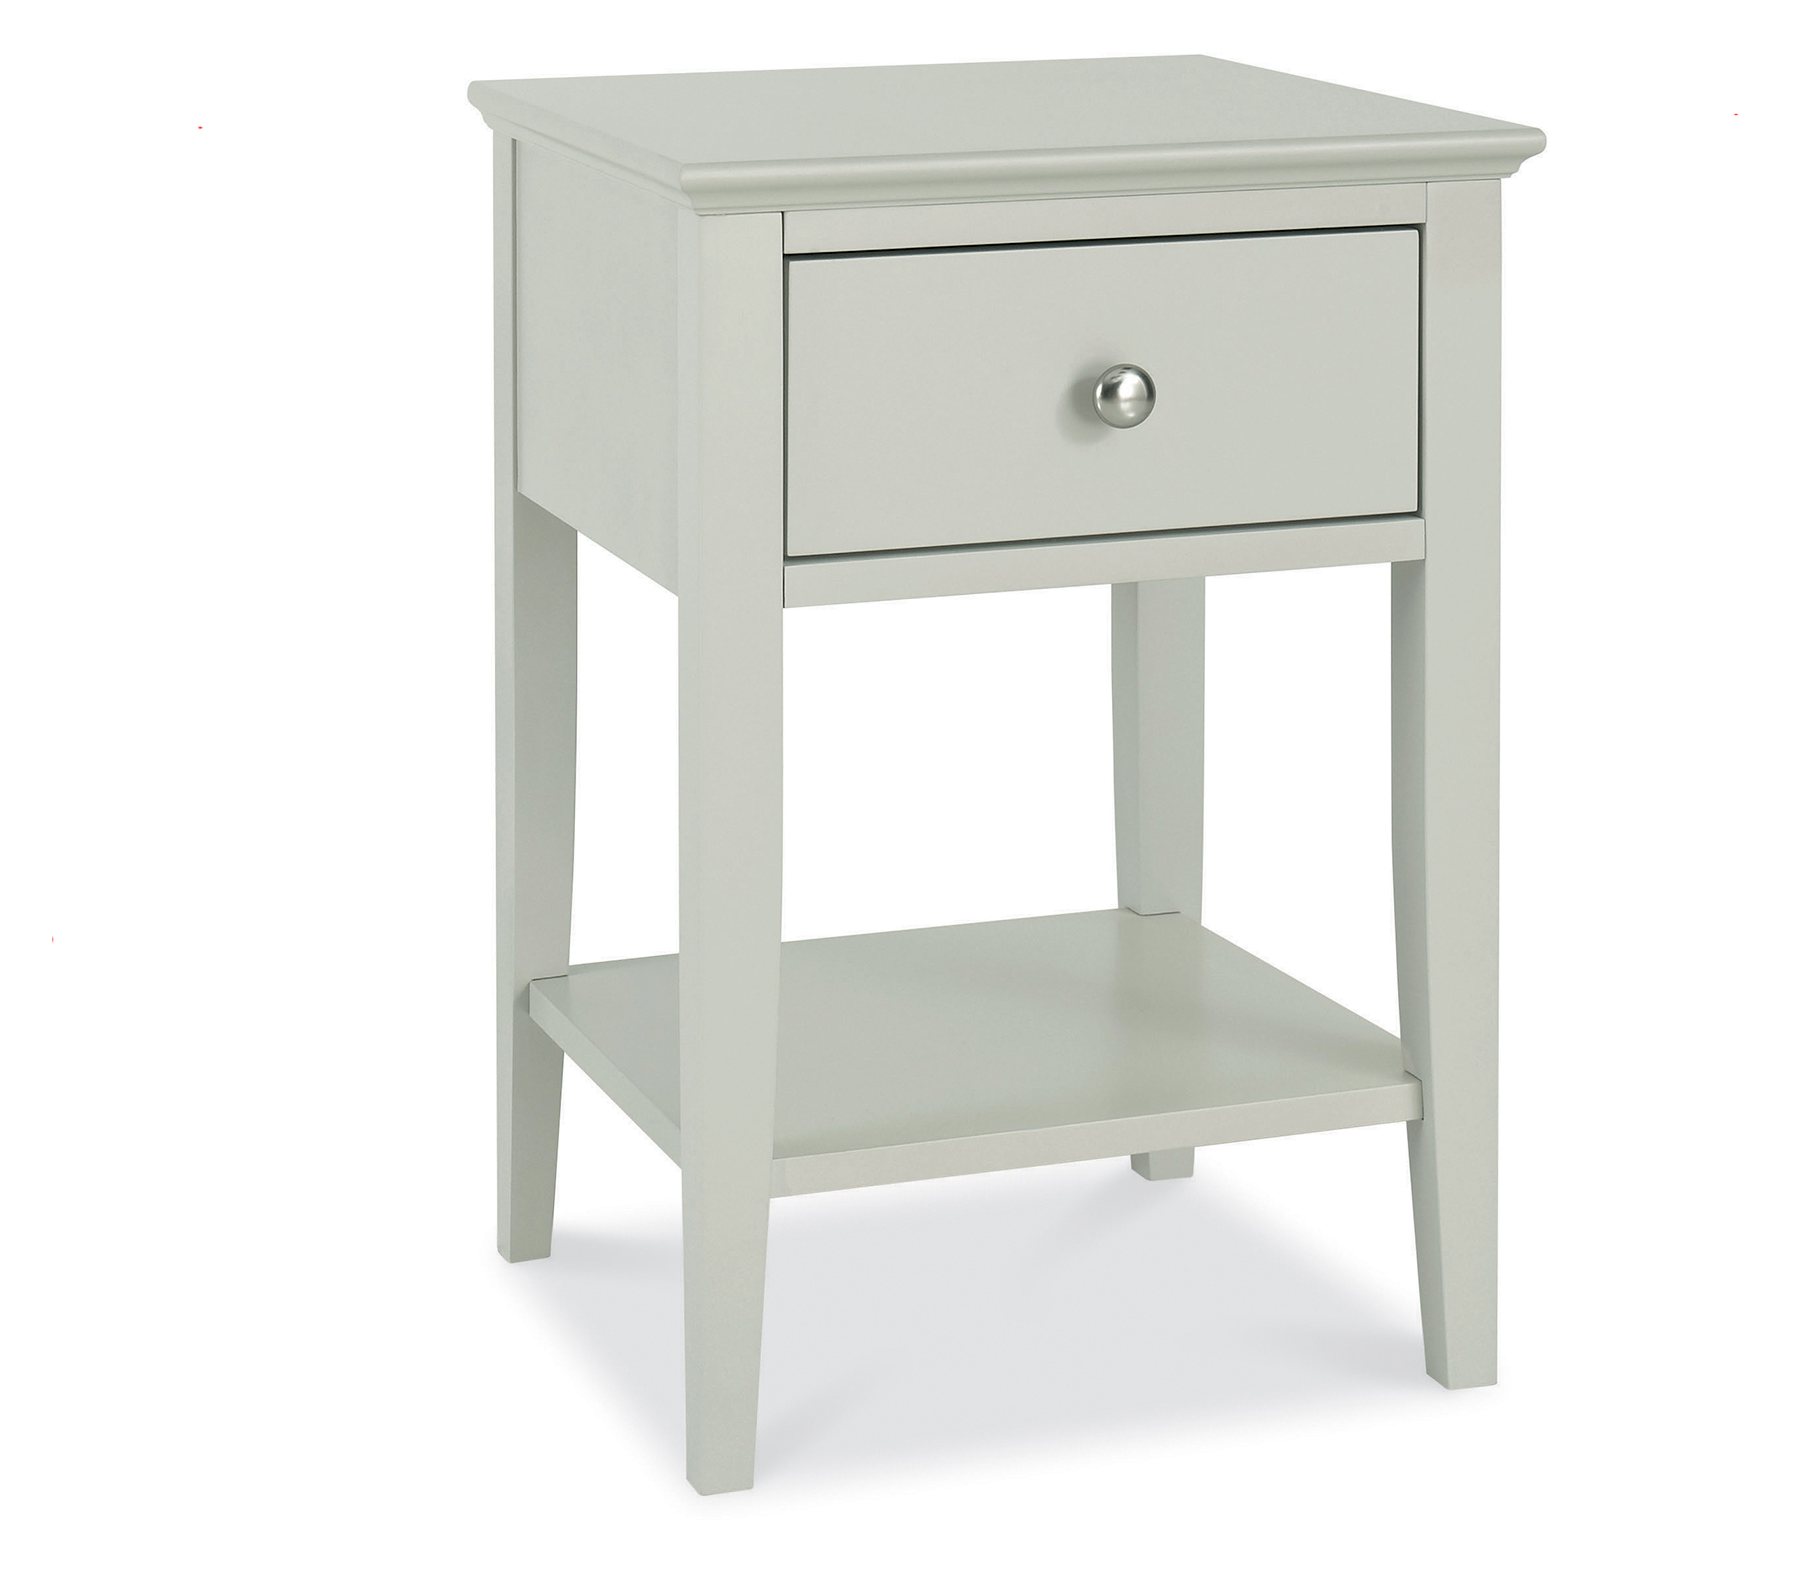 Caoimhe 1 Drawer Bedside Chest